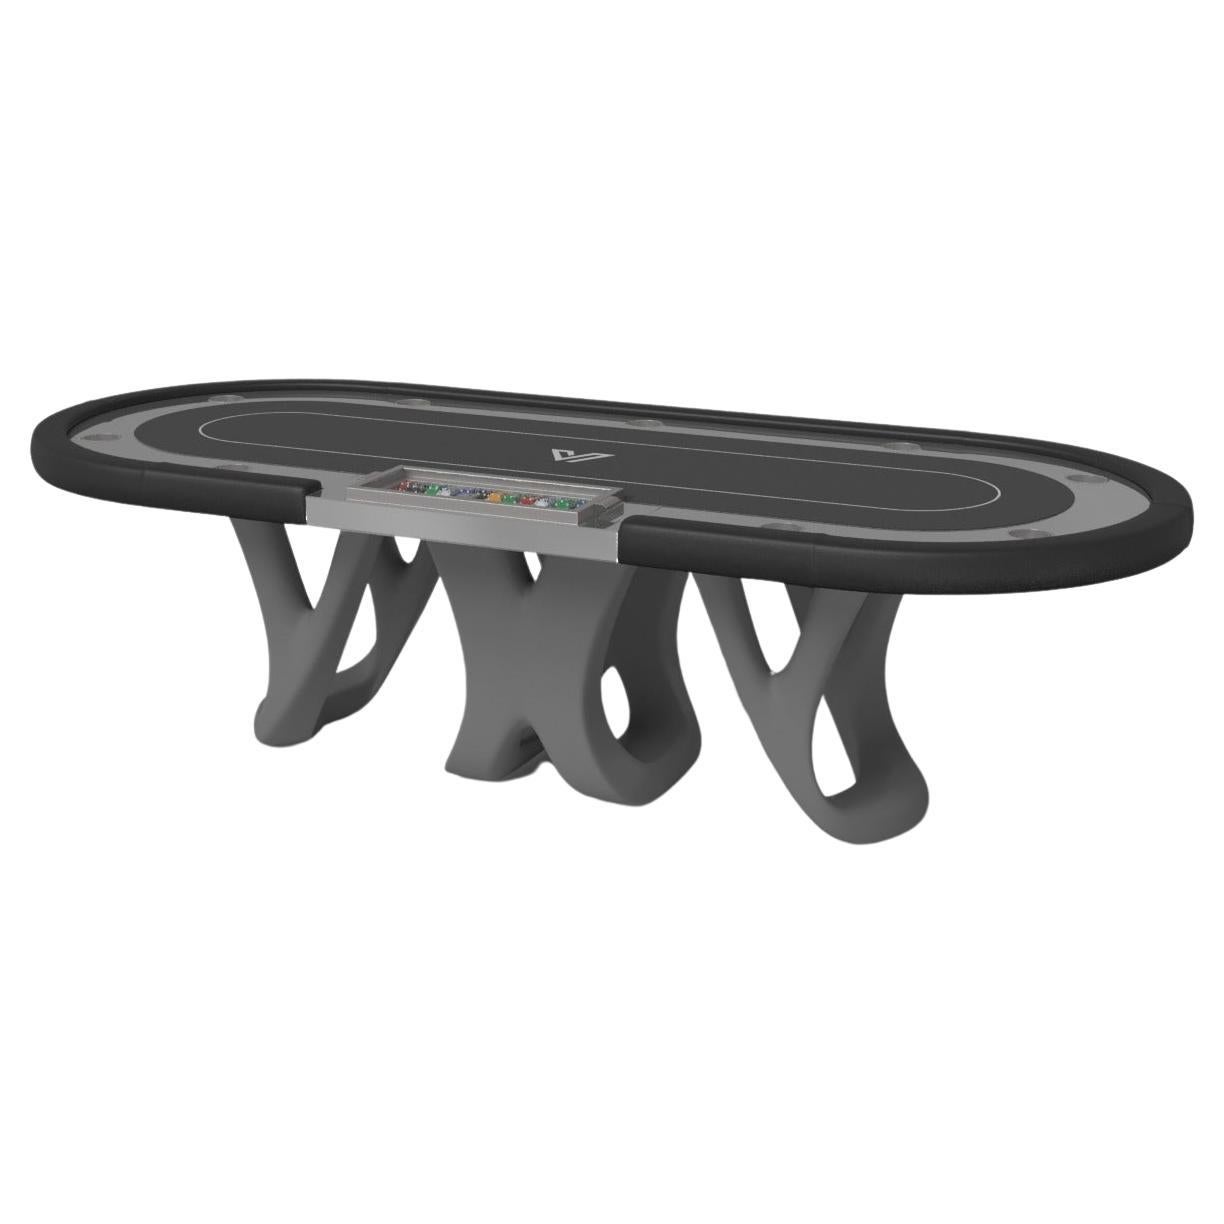 Elevate Customs Draco Poker Tables / Stainless Steel Sheet Metal in 8'8" - USA For Sale